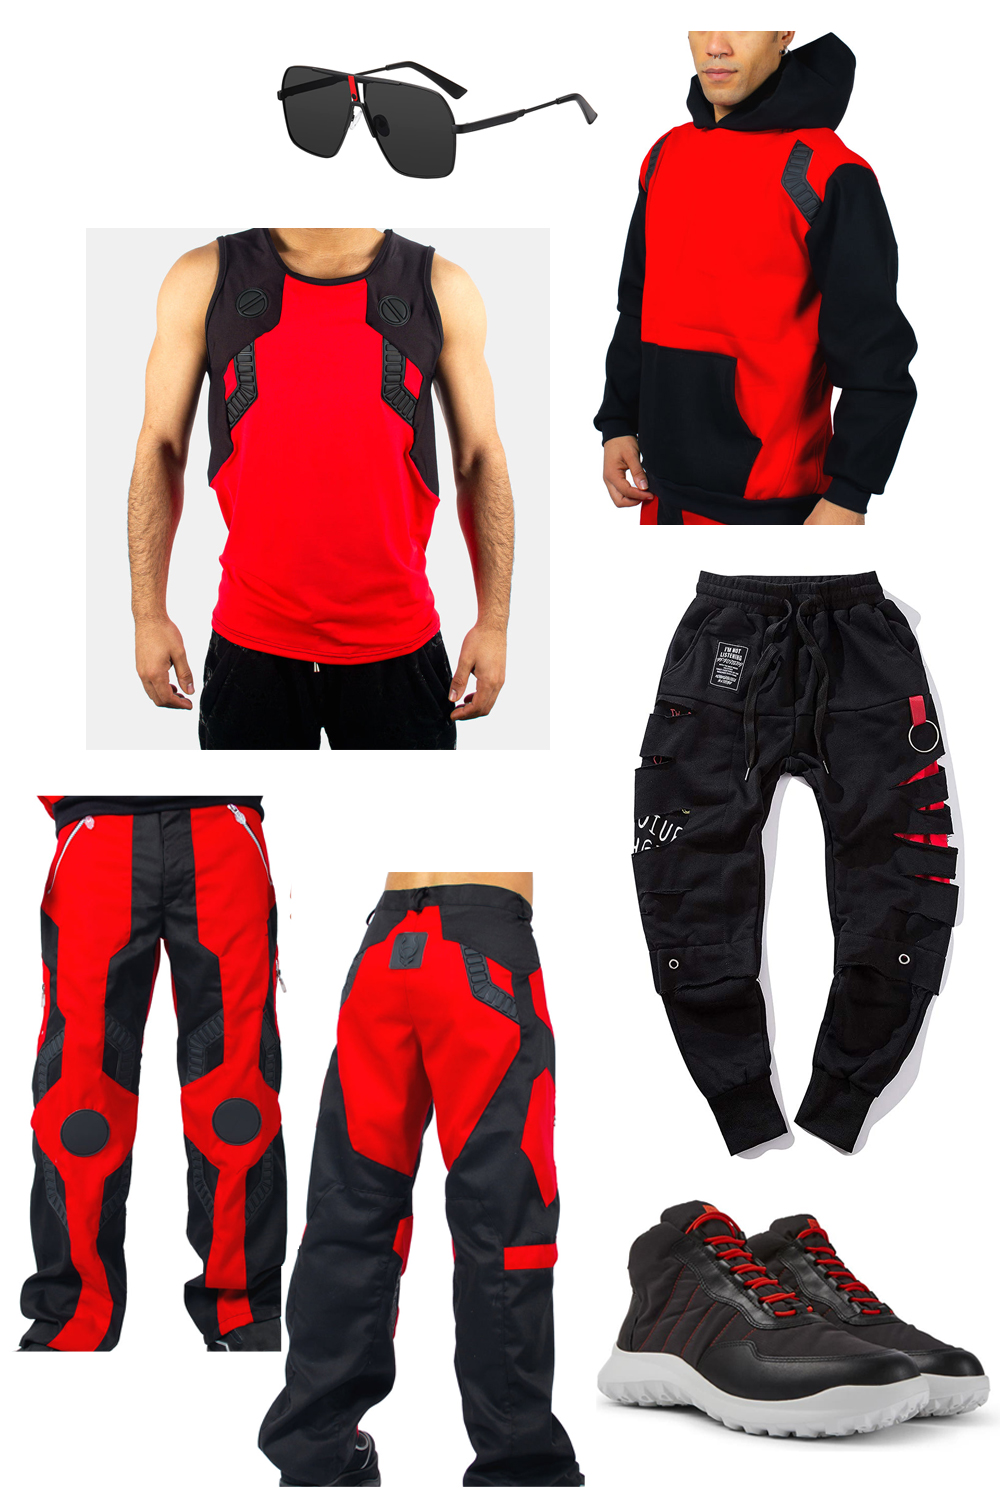 Ultra Music Festival 2022 – Men’s Outfits